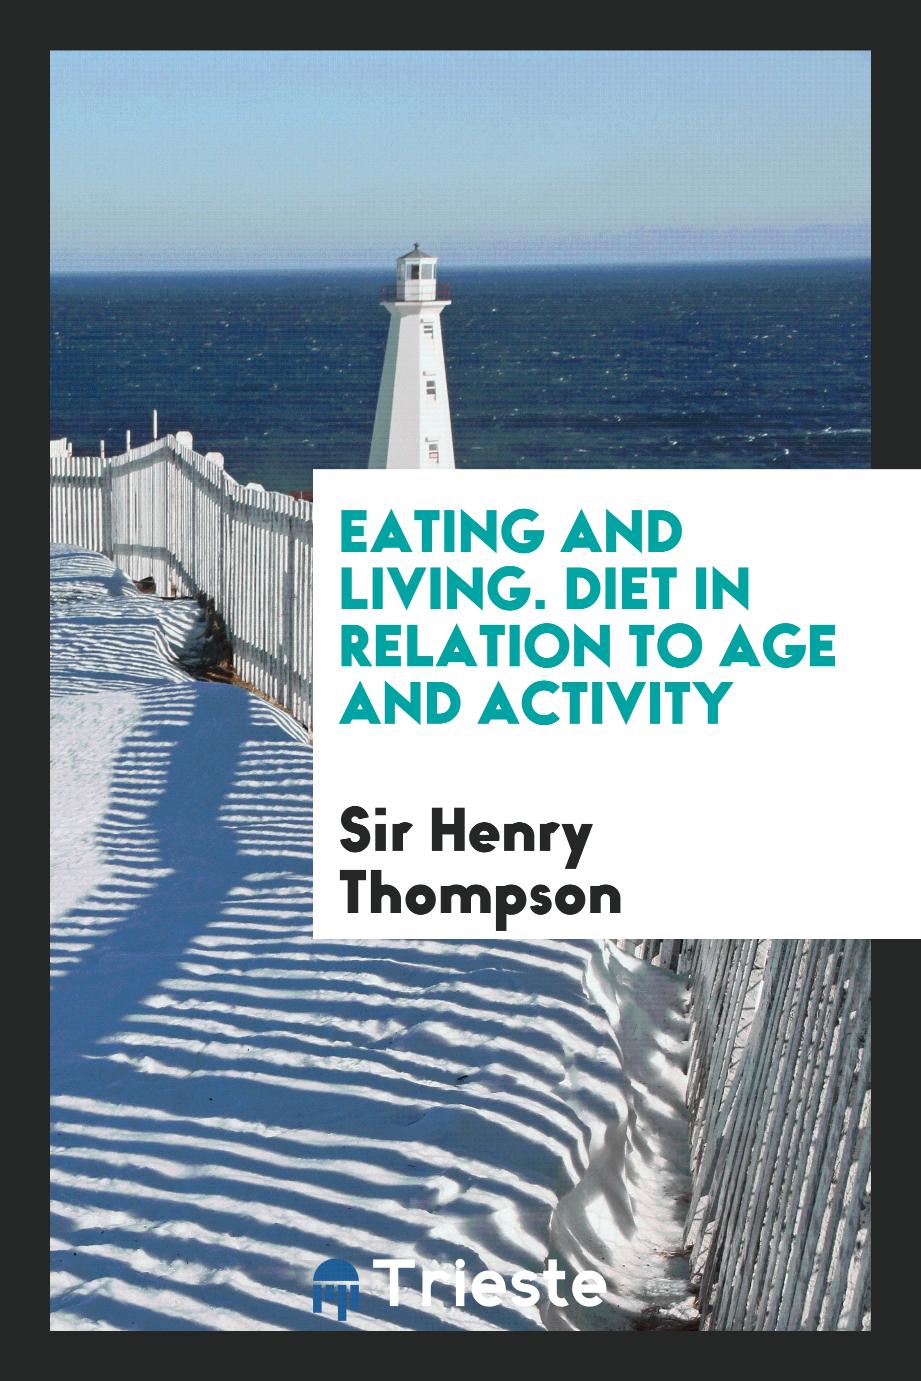 Eating and living. Diet in relation to age and activity